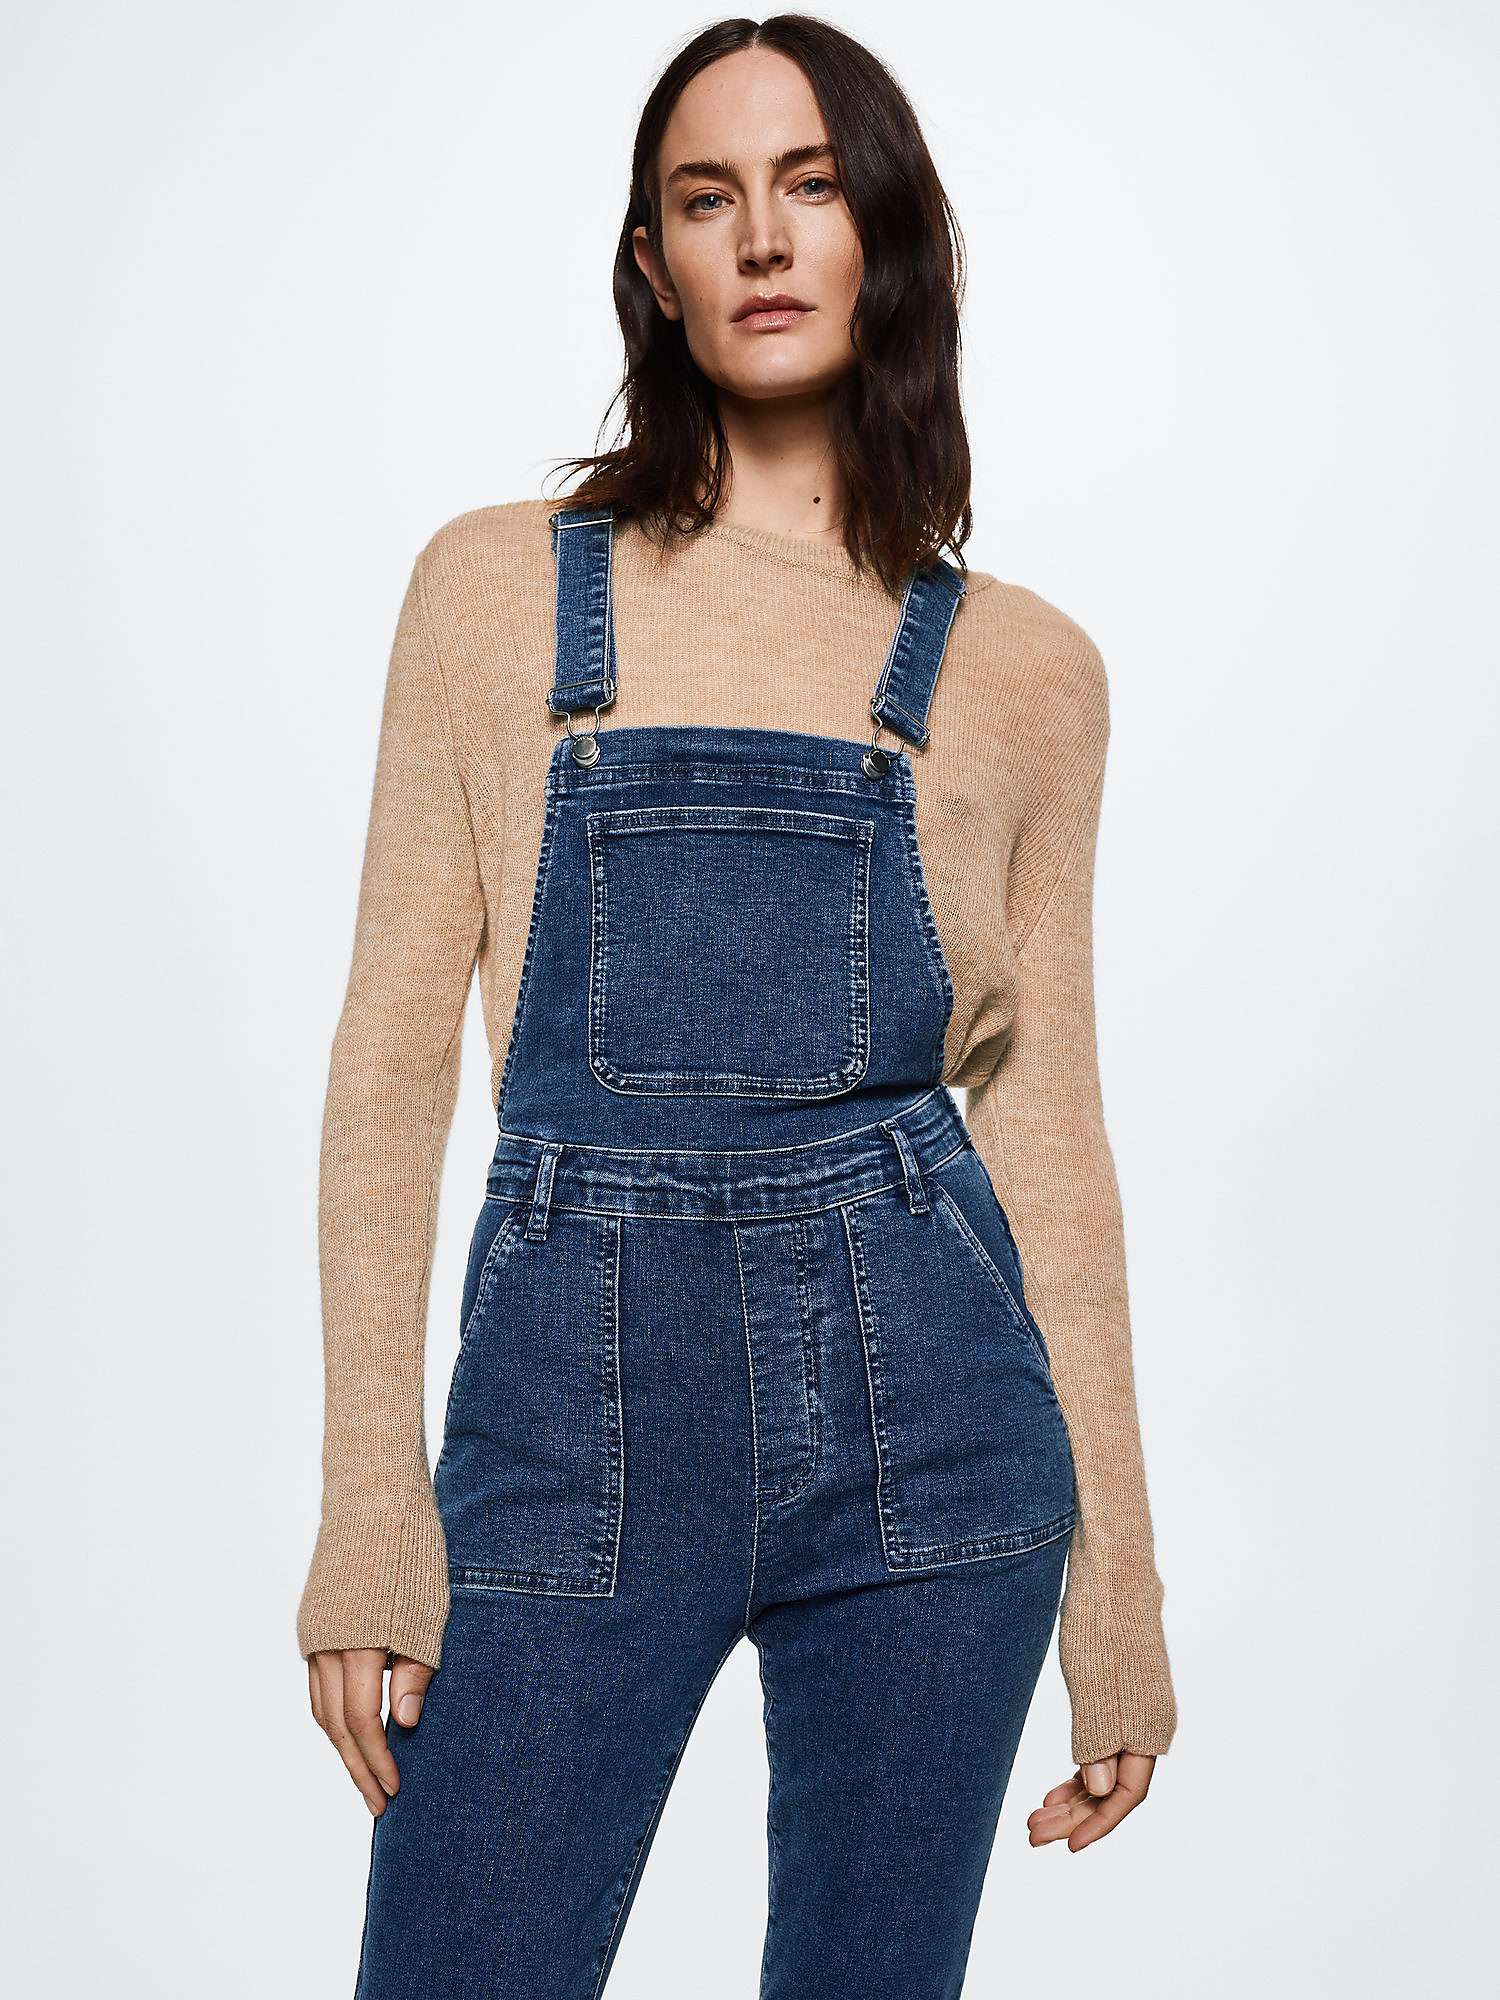 discount 50% Calzedonia jumpsuit WOMEN FASHION Baby Jumpsuits & Dungarees Jean Blue M 